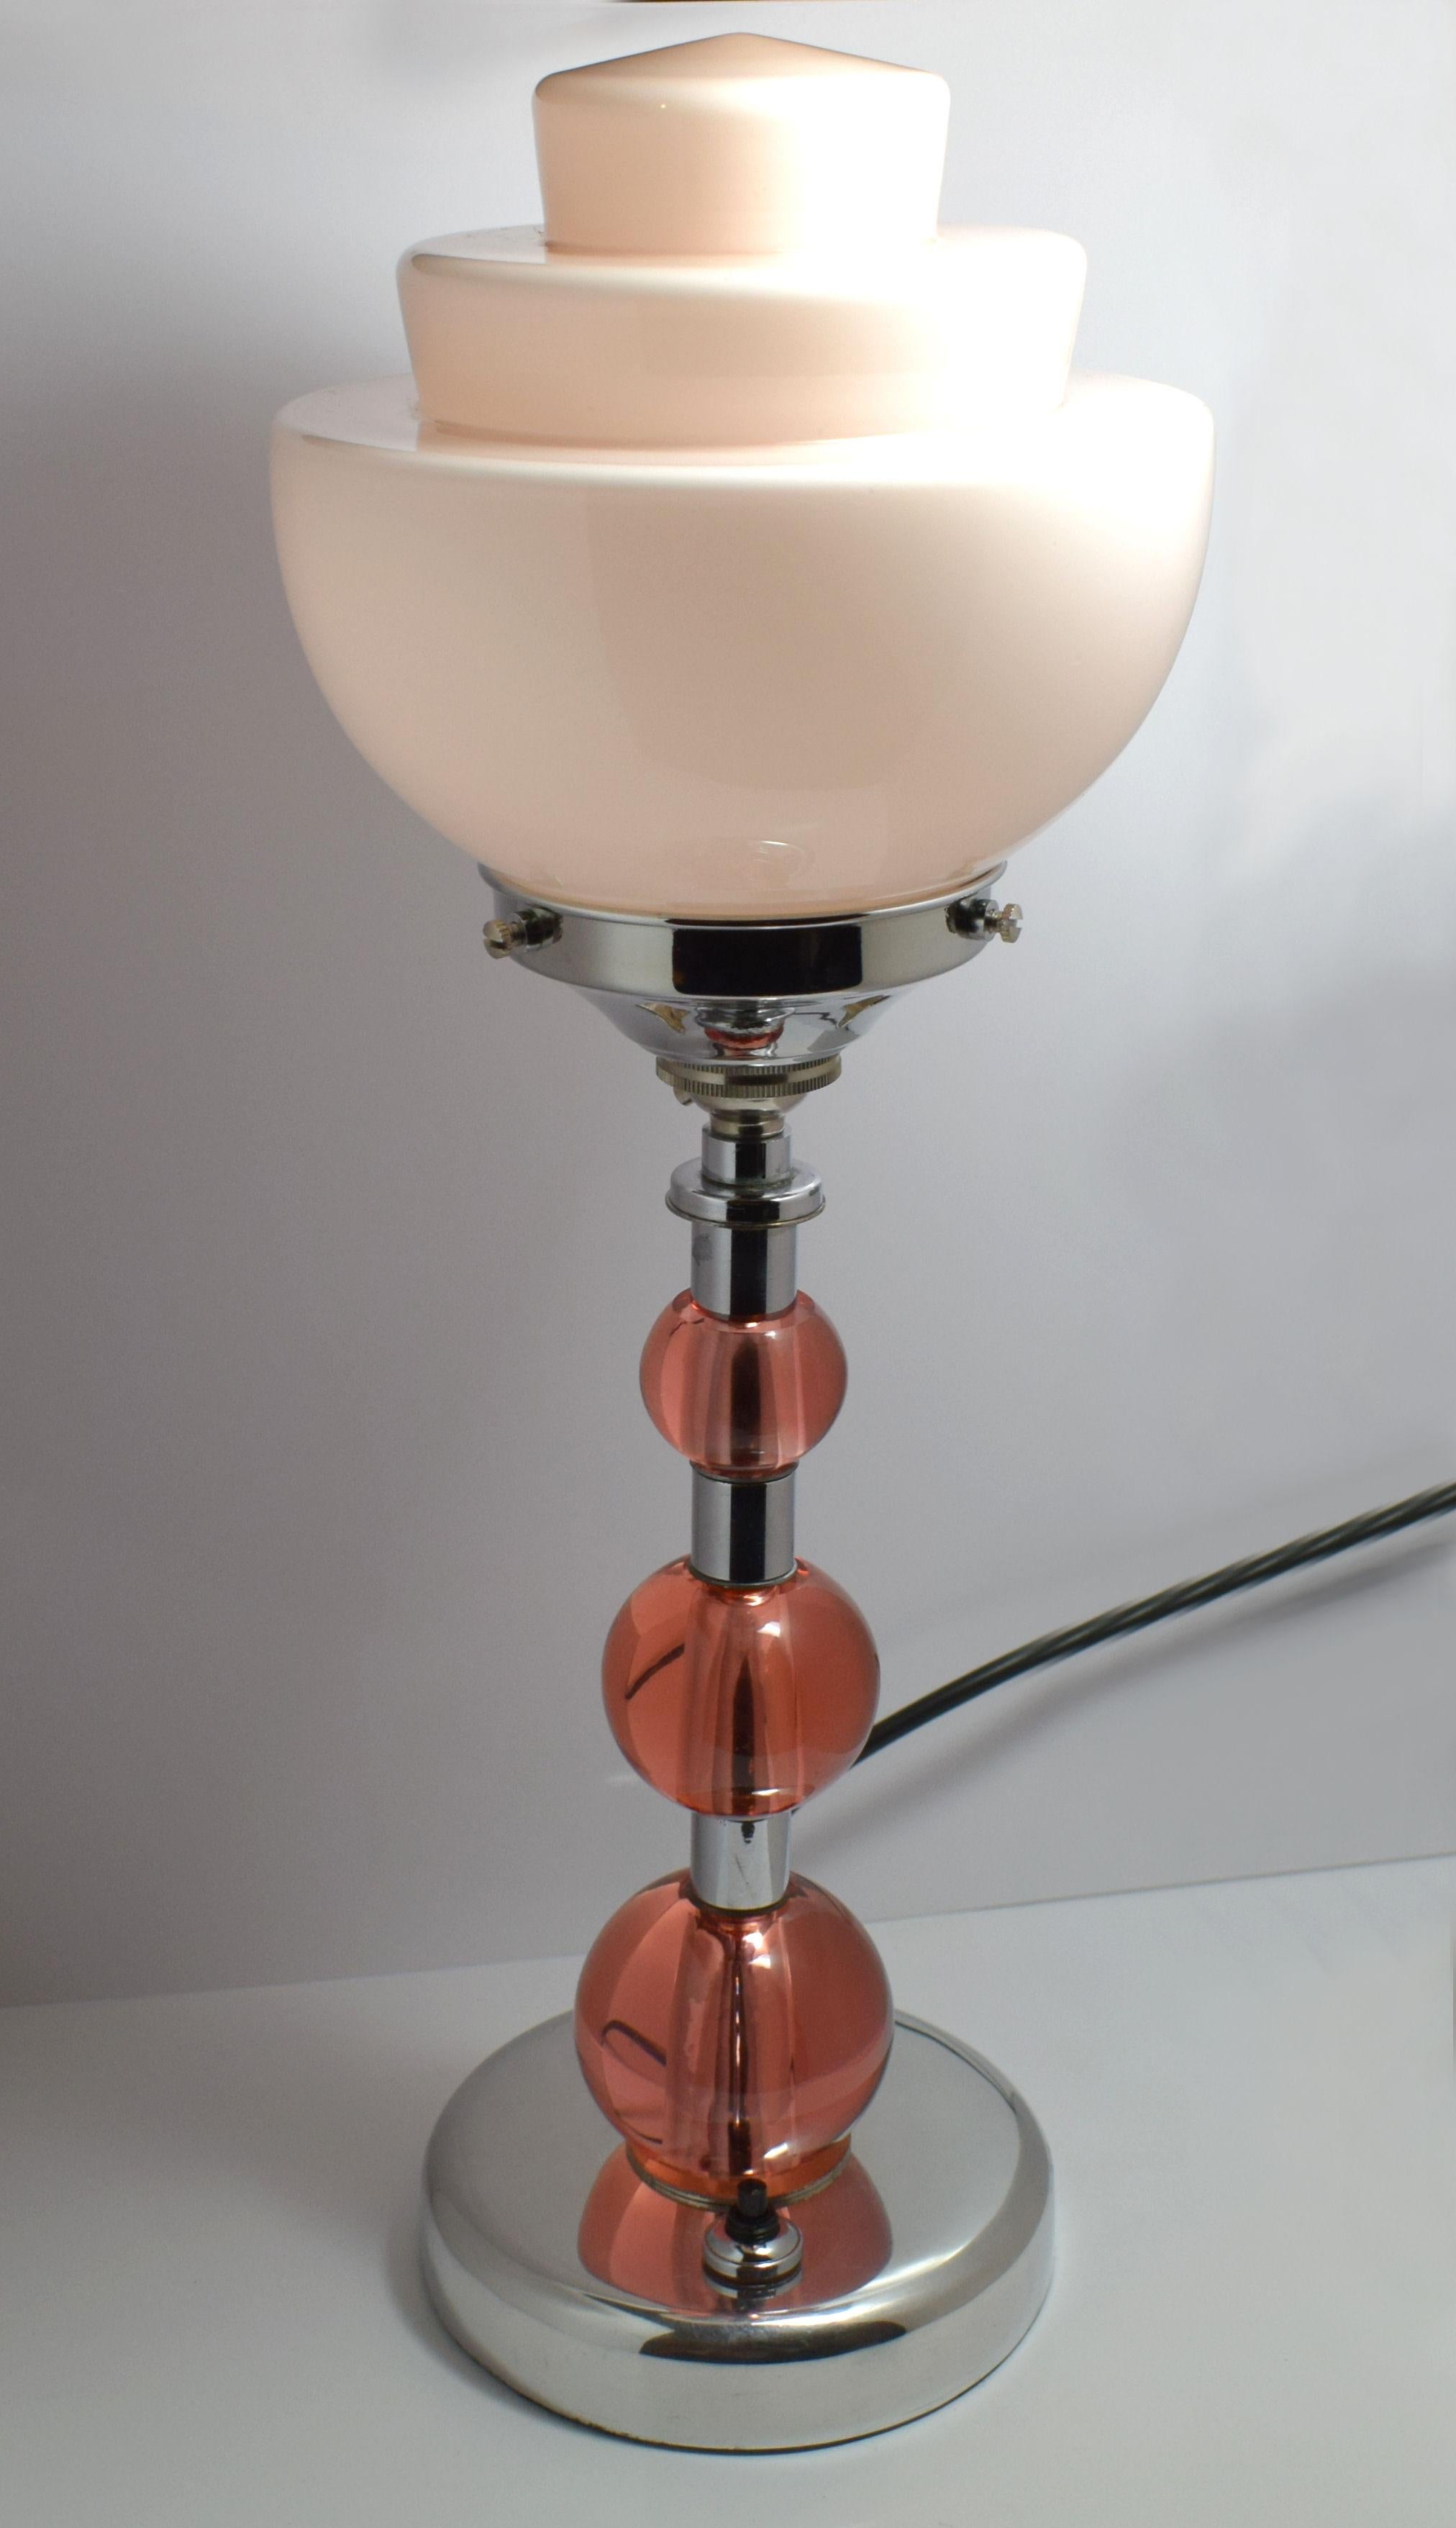 Original Art Deco lamp dating to the 1930s. This wonderful lamp features a three graduating size pink glass balls on a chrome column, base and gallery. A complimentary soft pink three stepped glass shade completes this lamp perfectly. Condition is